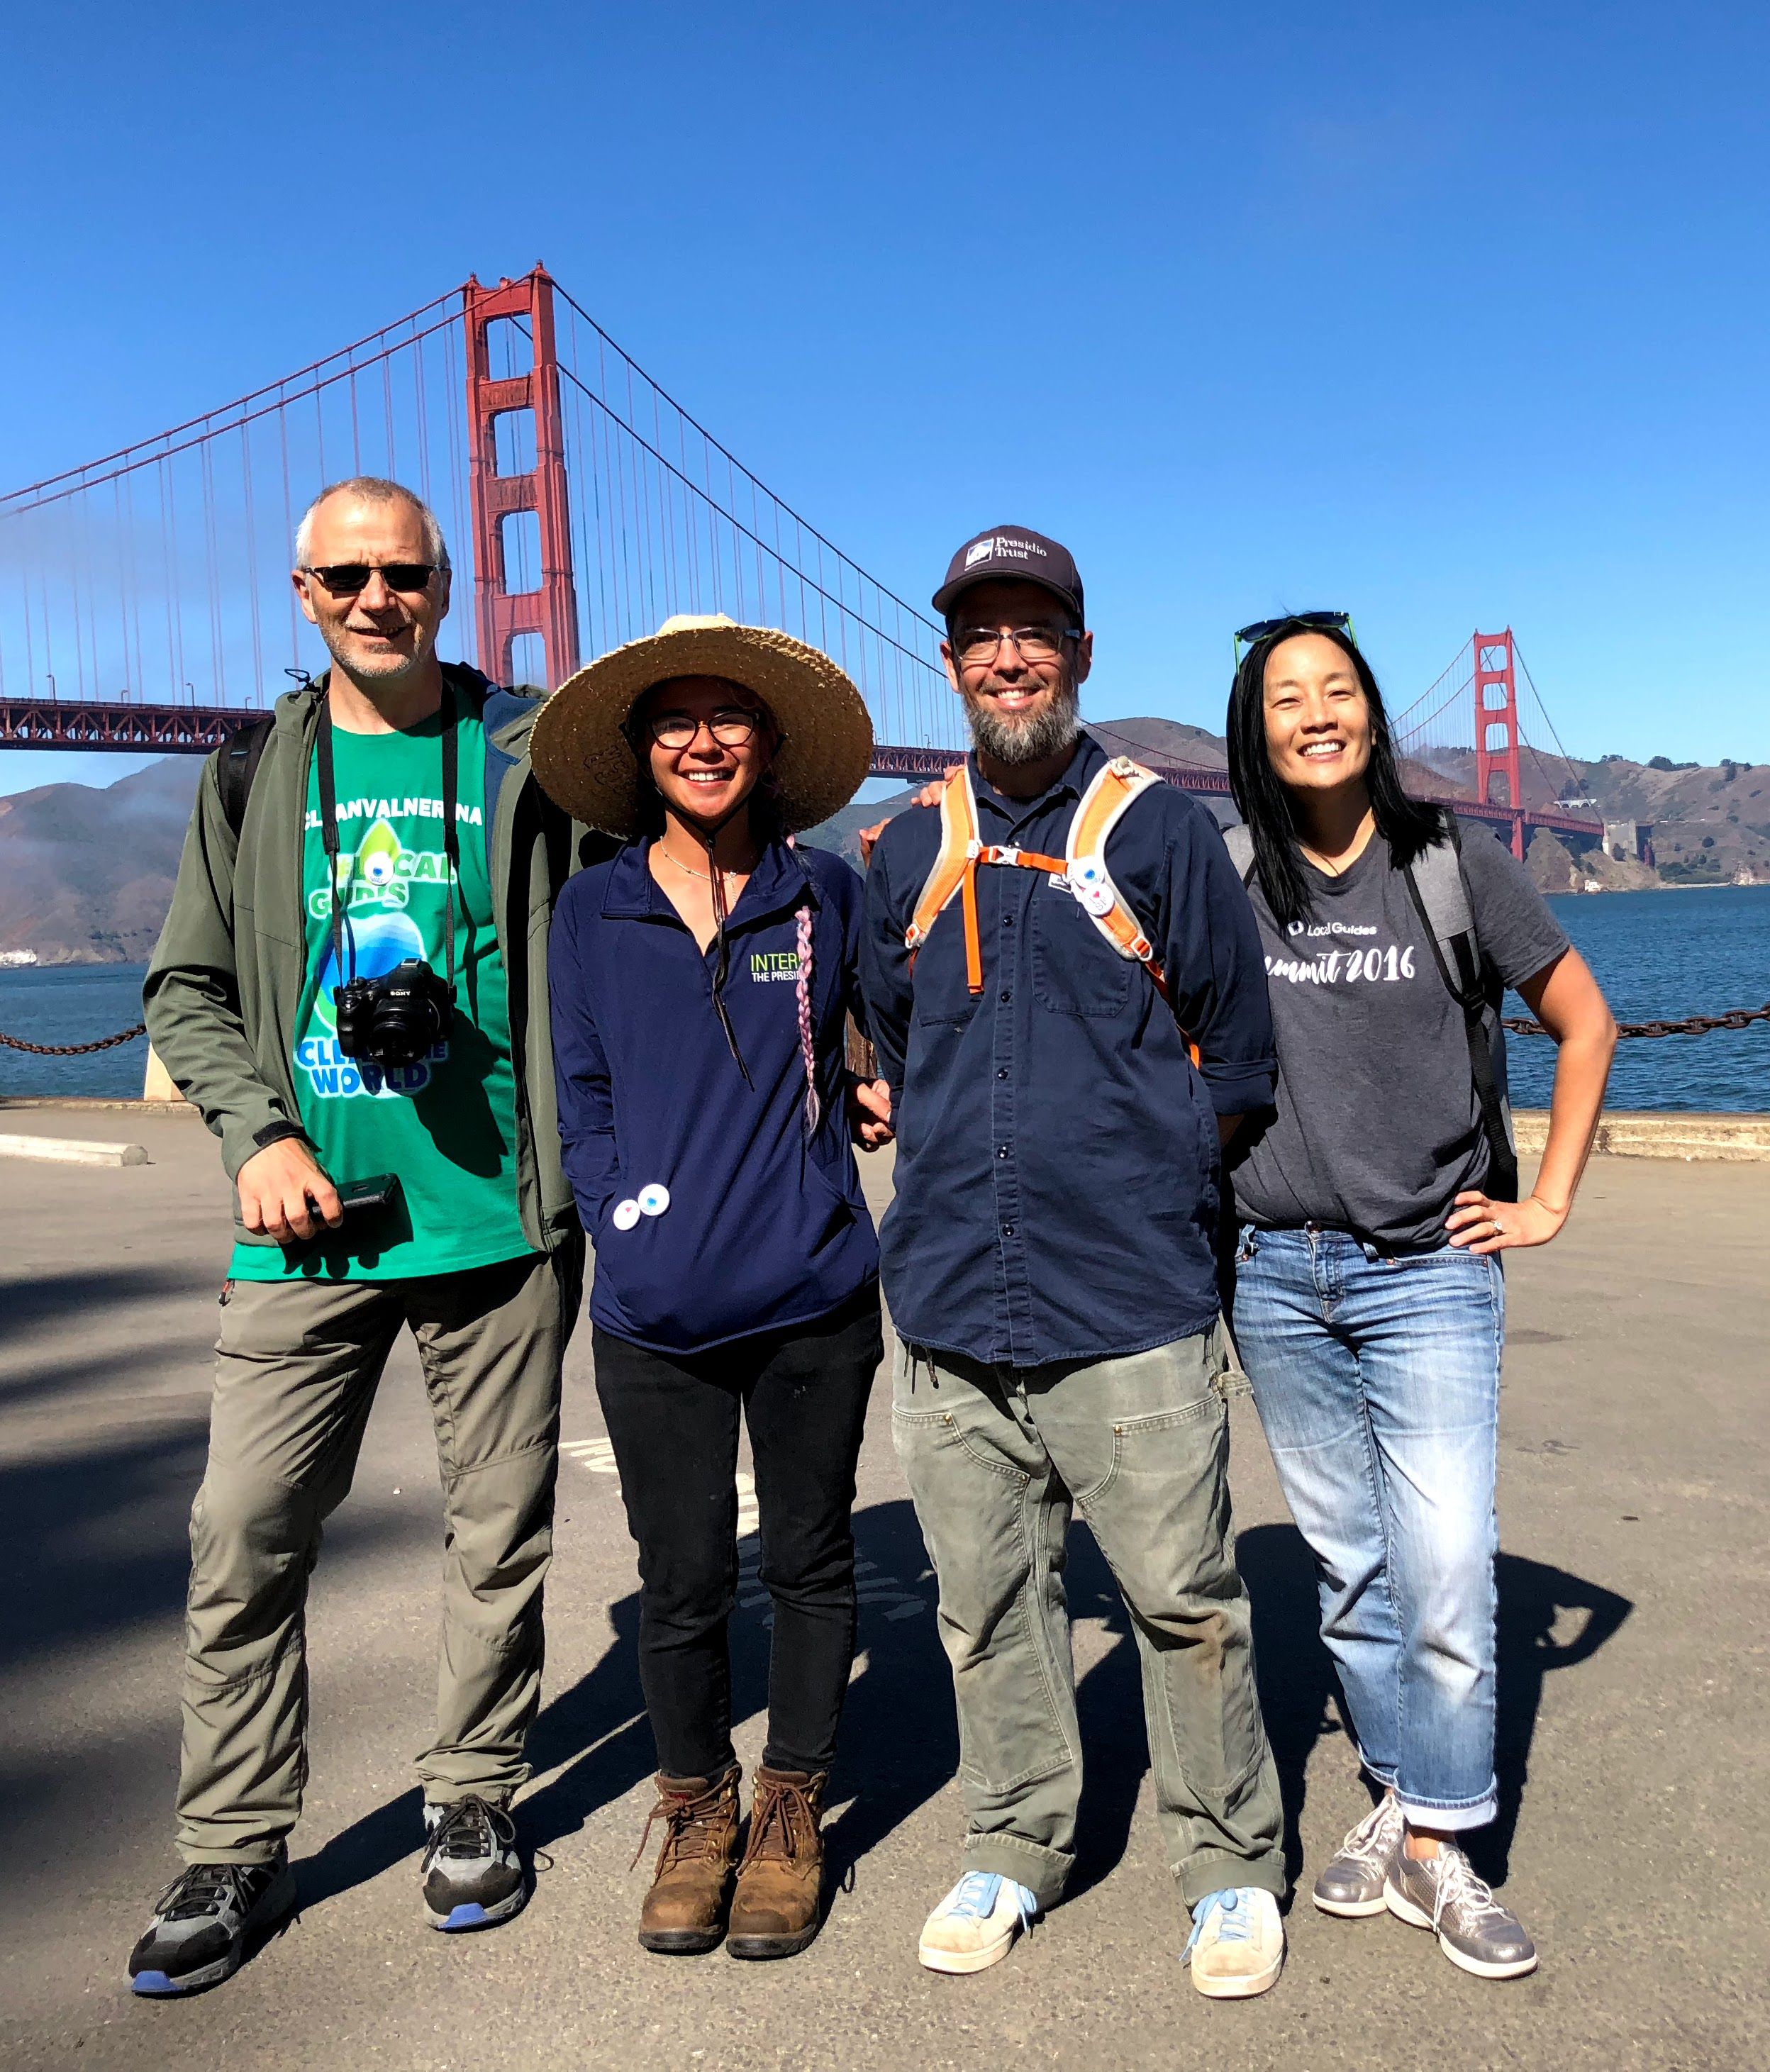 Clean The World - Connect Live 2018 Edition Hosts and The Presidio Trust Volunteers Team. L to R:  @ermest, Ysenia, Jason, and @karenvchin. Photo Credit: SF Bay Area Local Guide and Connect Moderator @karenvchin